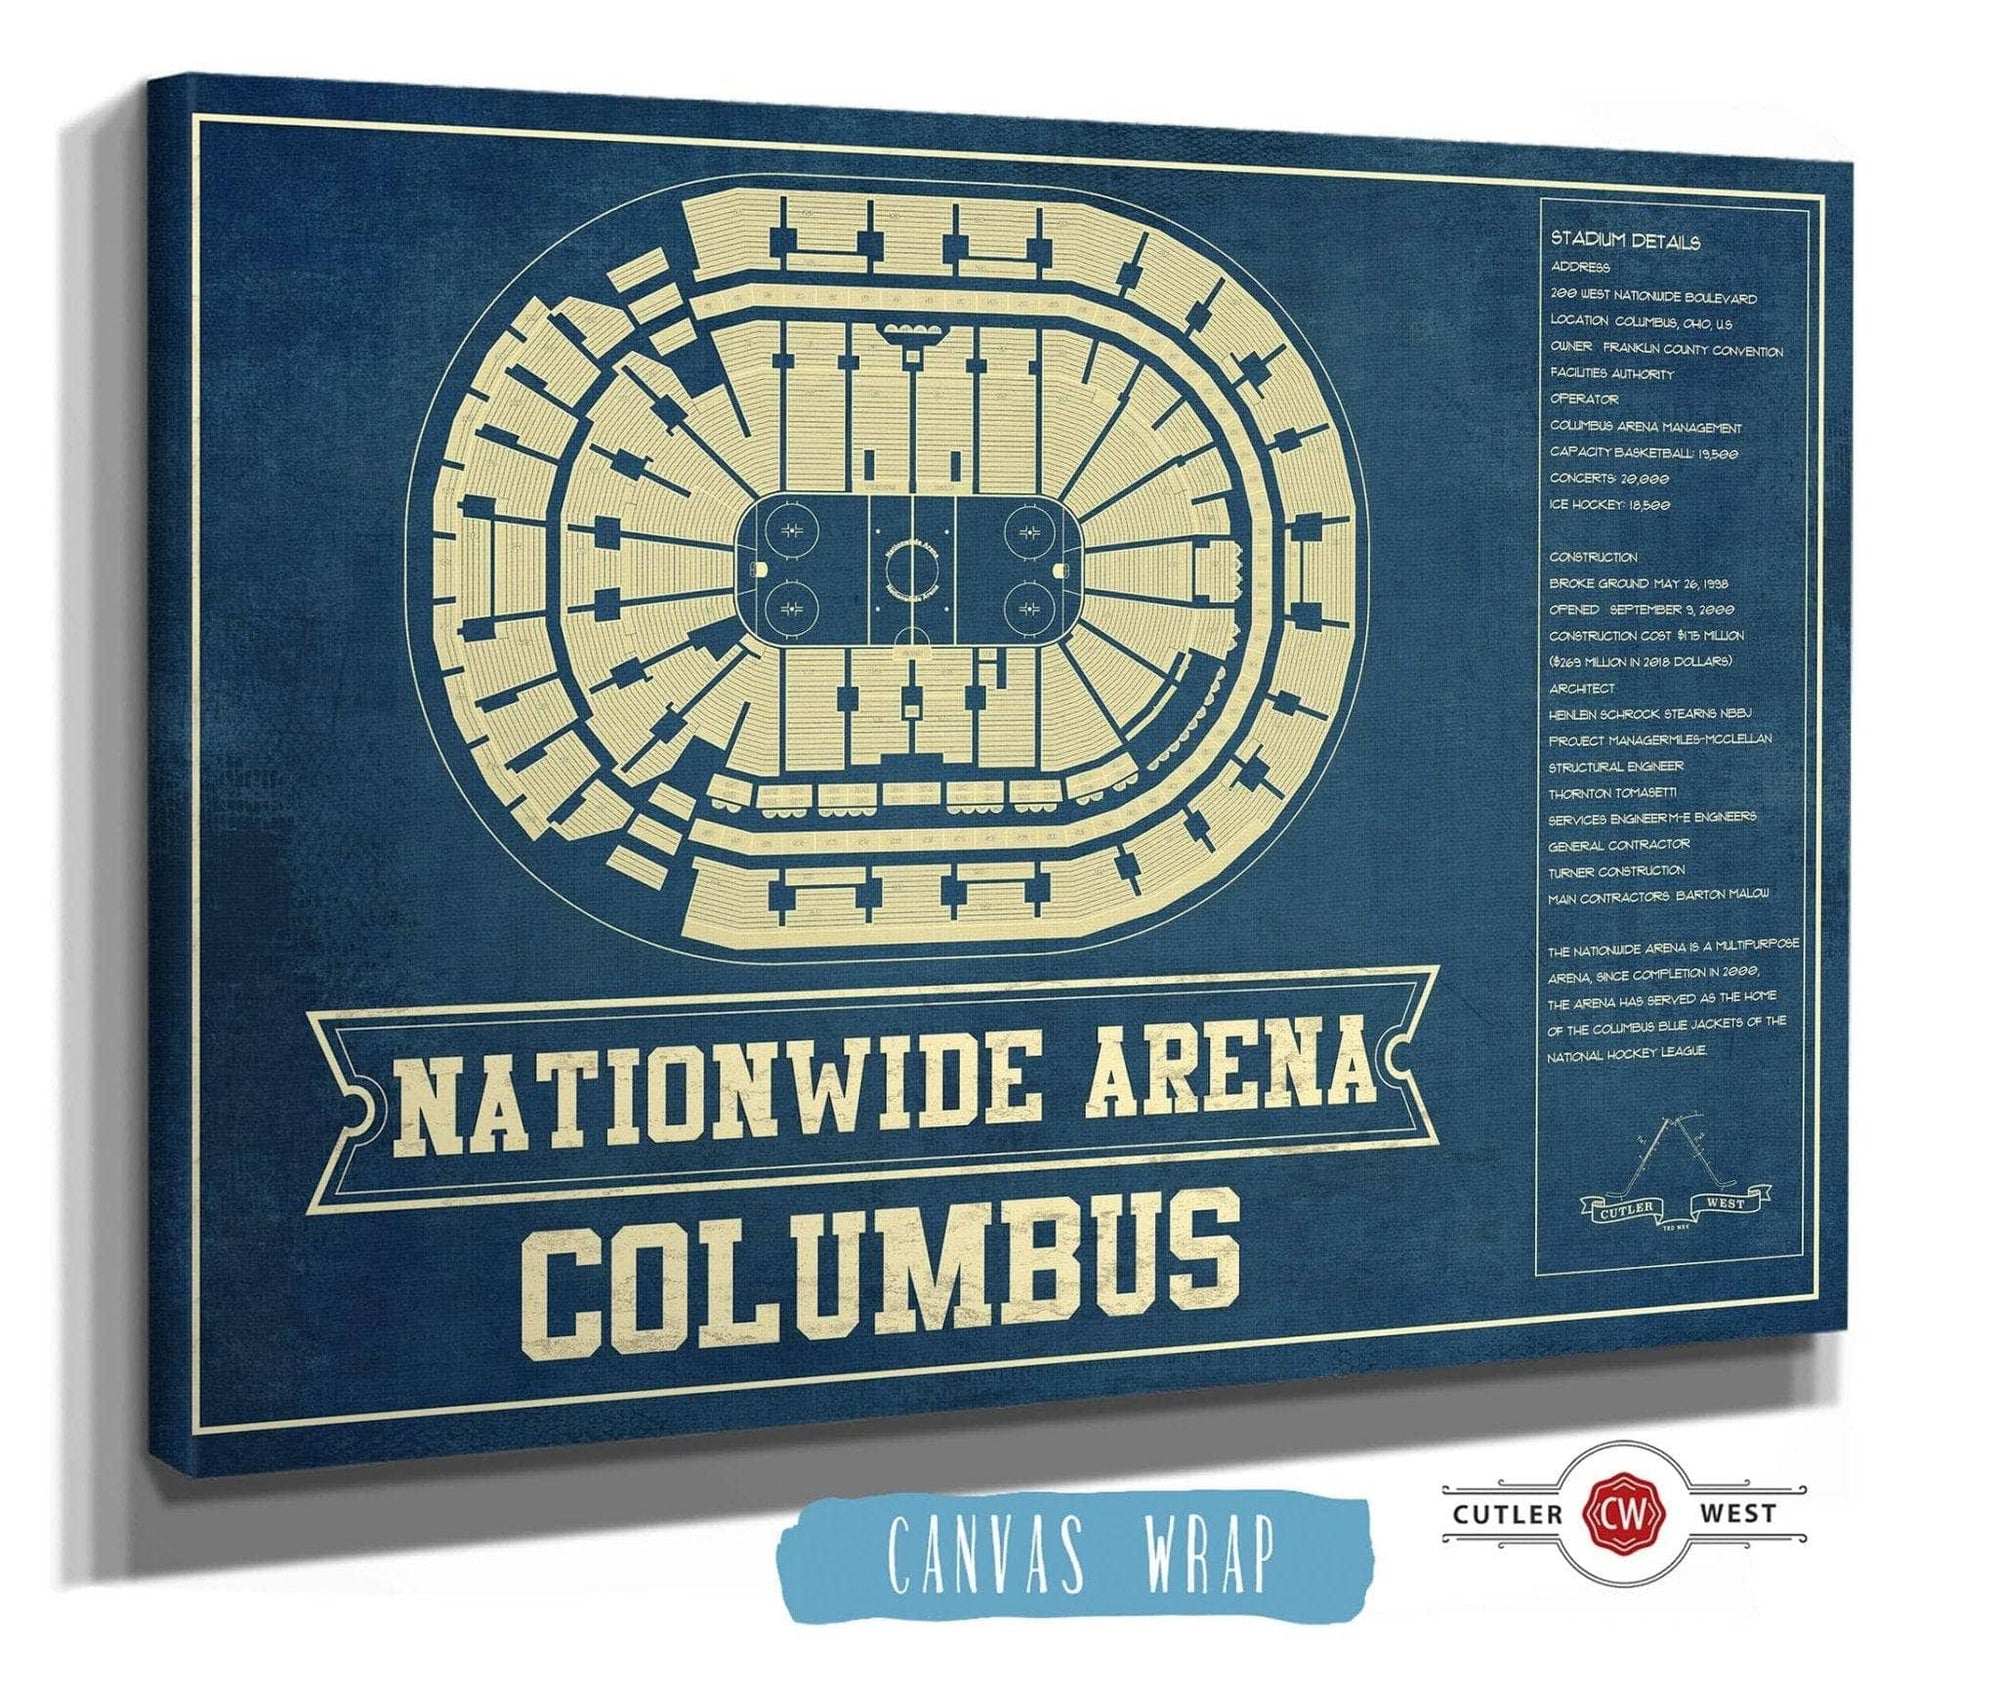 Cutler West 14" x 11" / Stretched Canvas Wrap Columbus Blue Jackets Nationwide Arena Seating Chart - Vintage Hockey Print 673820723_77954